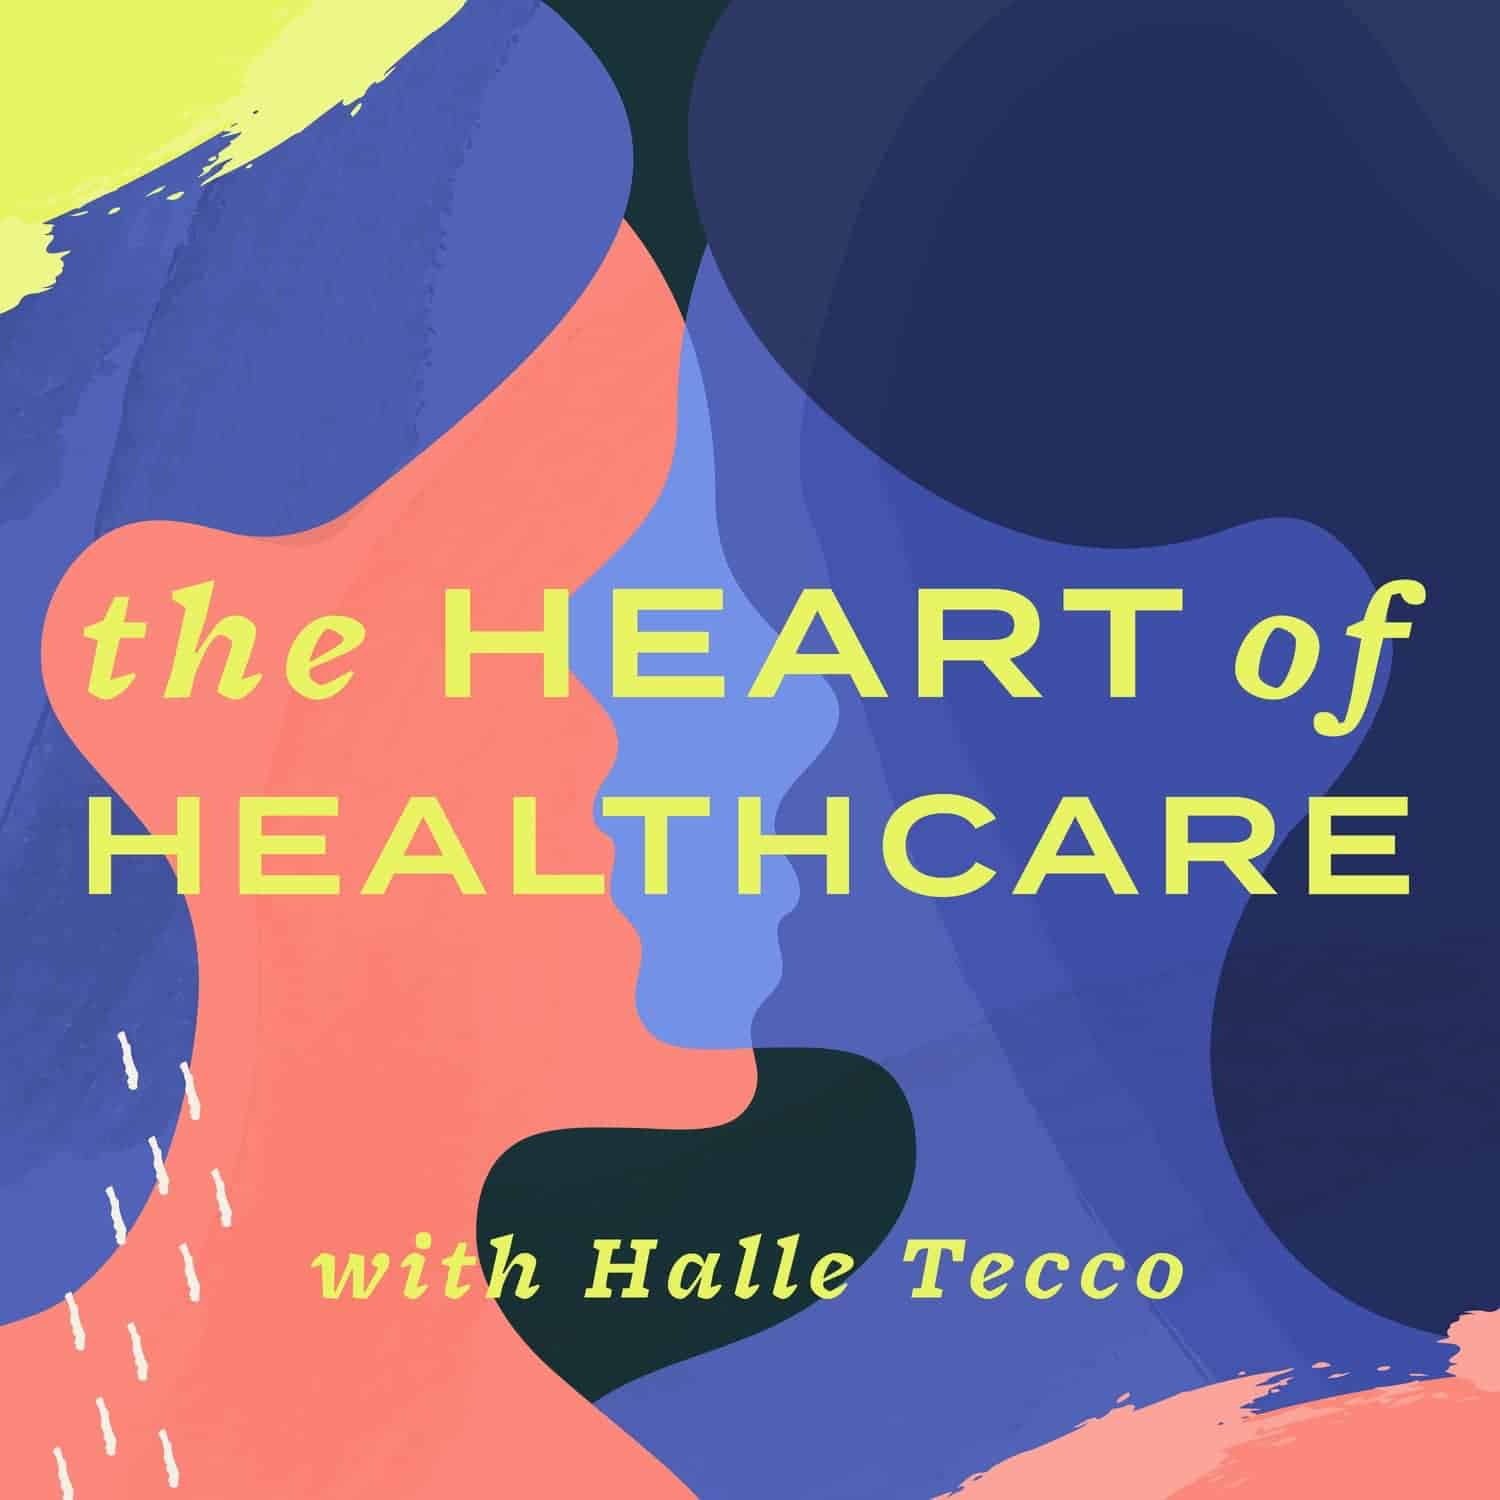 The Heart of Healthcare